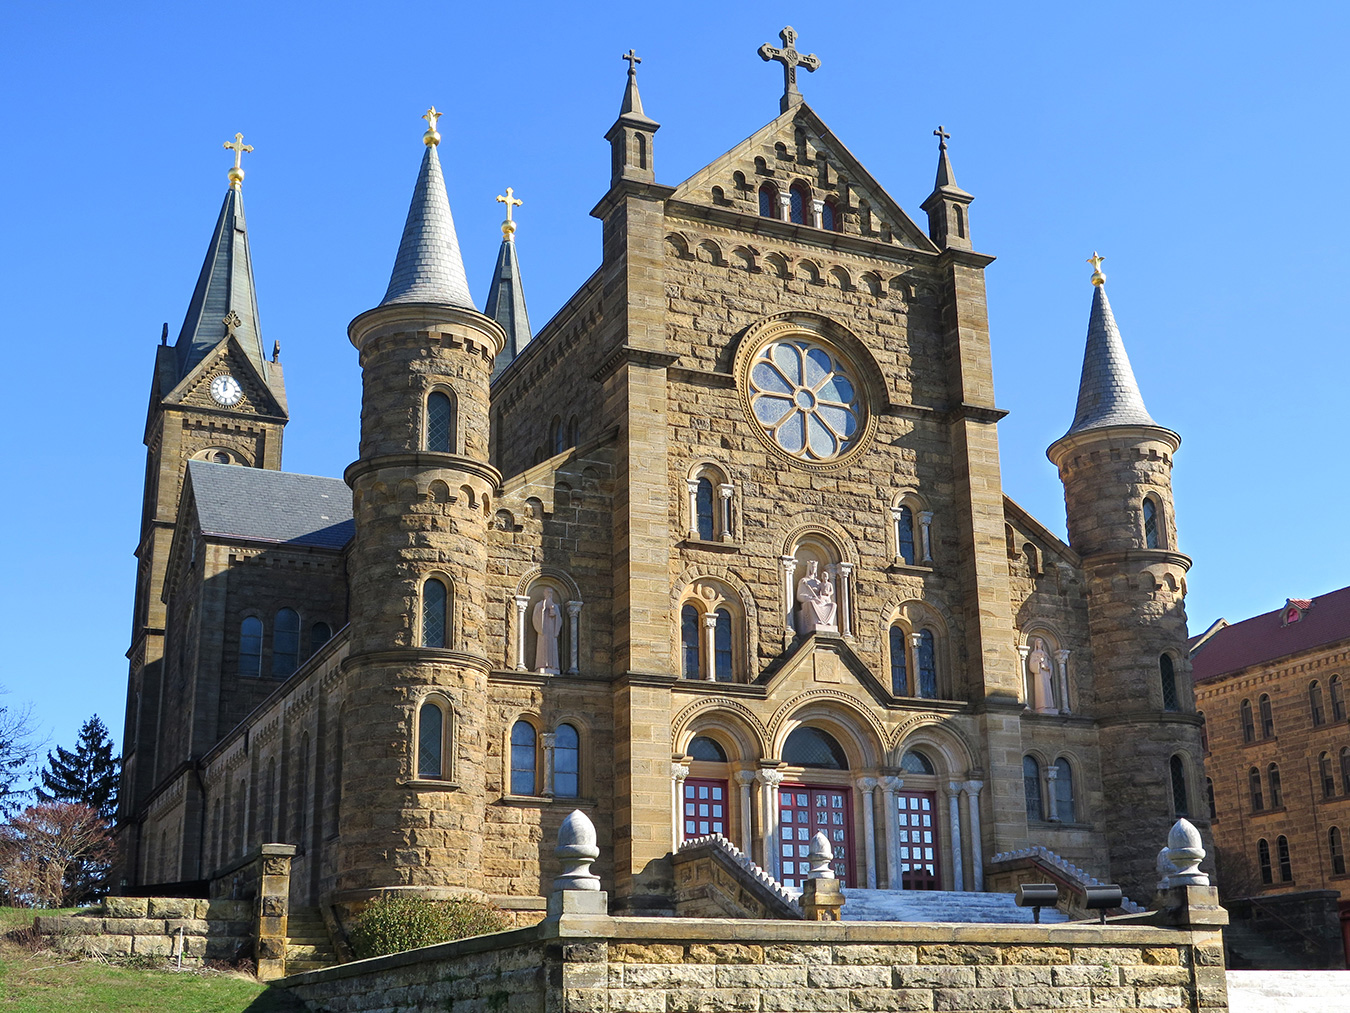 In the rolling hills of southern Indiana, the ADT passes St. Meinrad Archabbey, which was built between 1899 and 1907 with sandstone mined from a nearby quarry. | Photo by Ron Eid